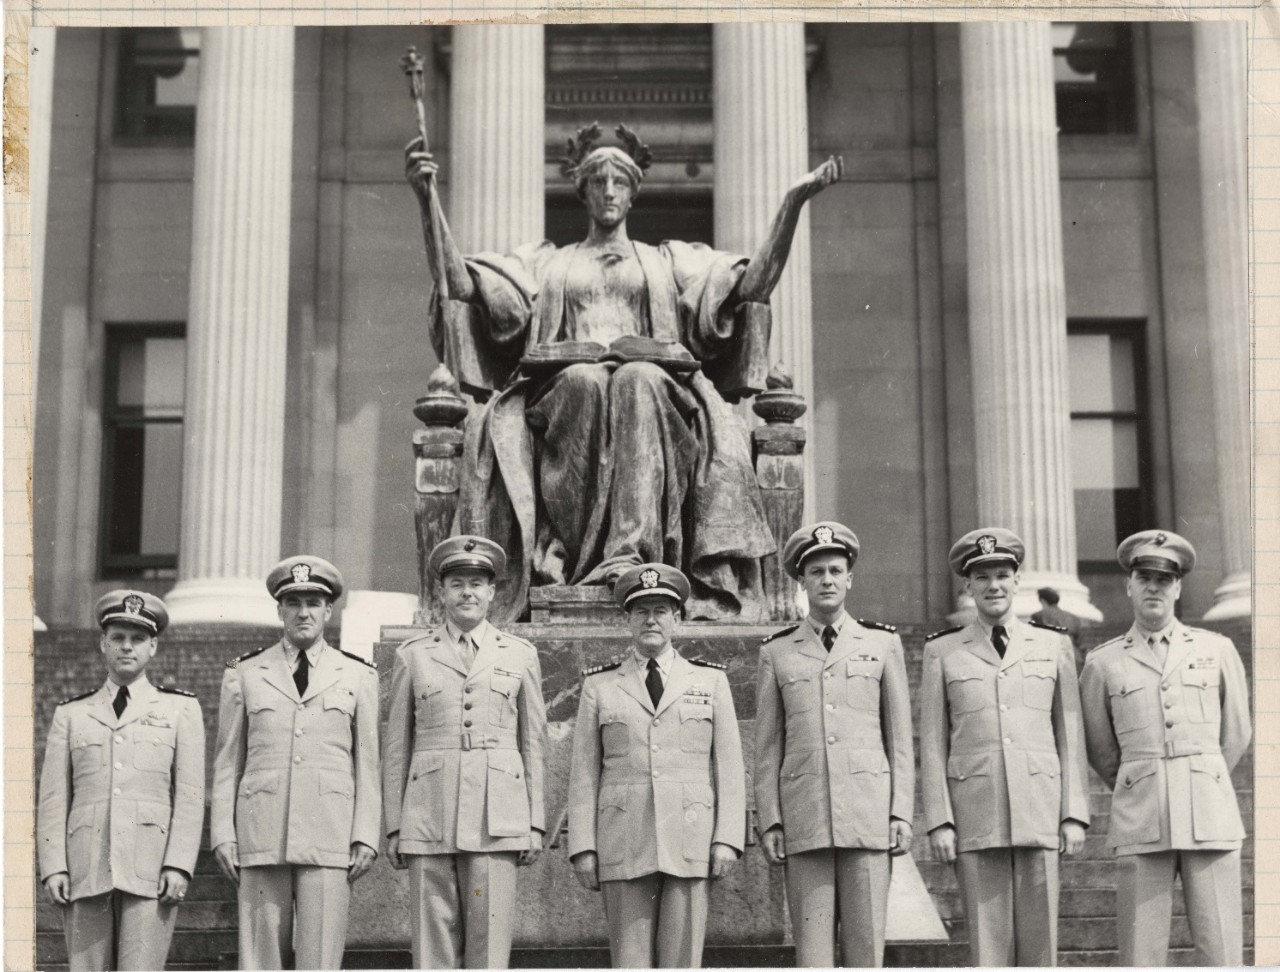 Seven NROTC officers posing in front of Alma Mater statue, 1953 Columbian